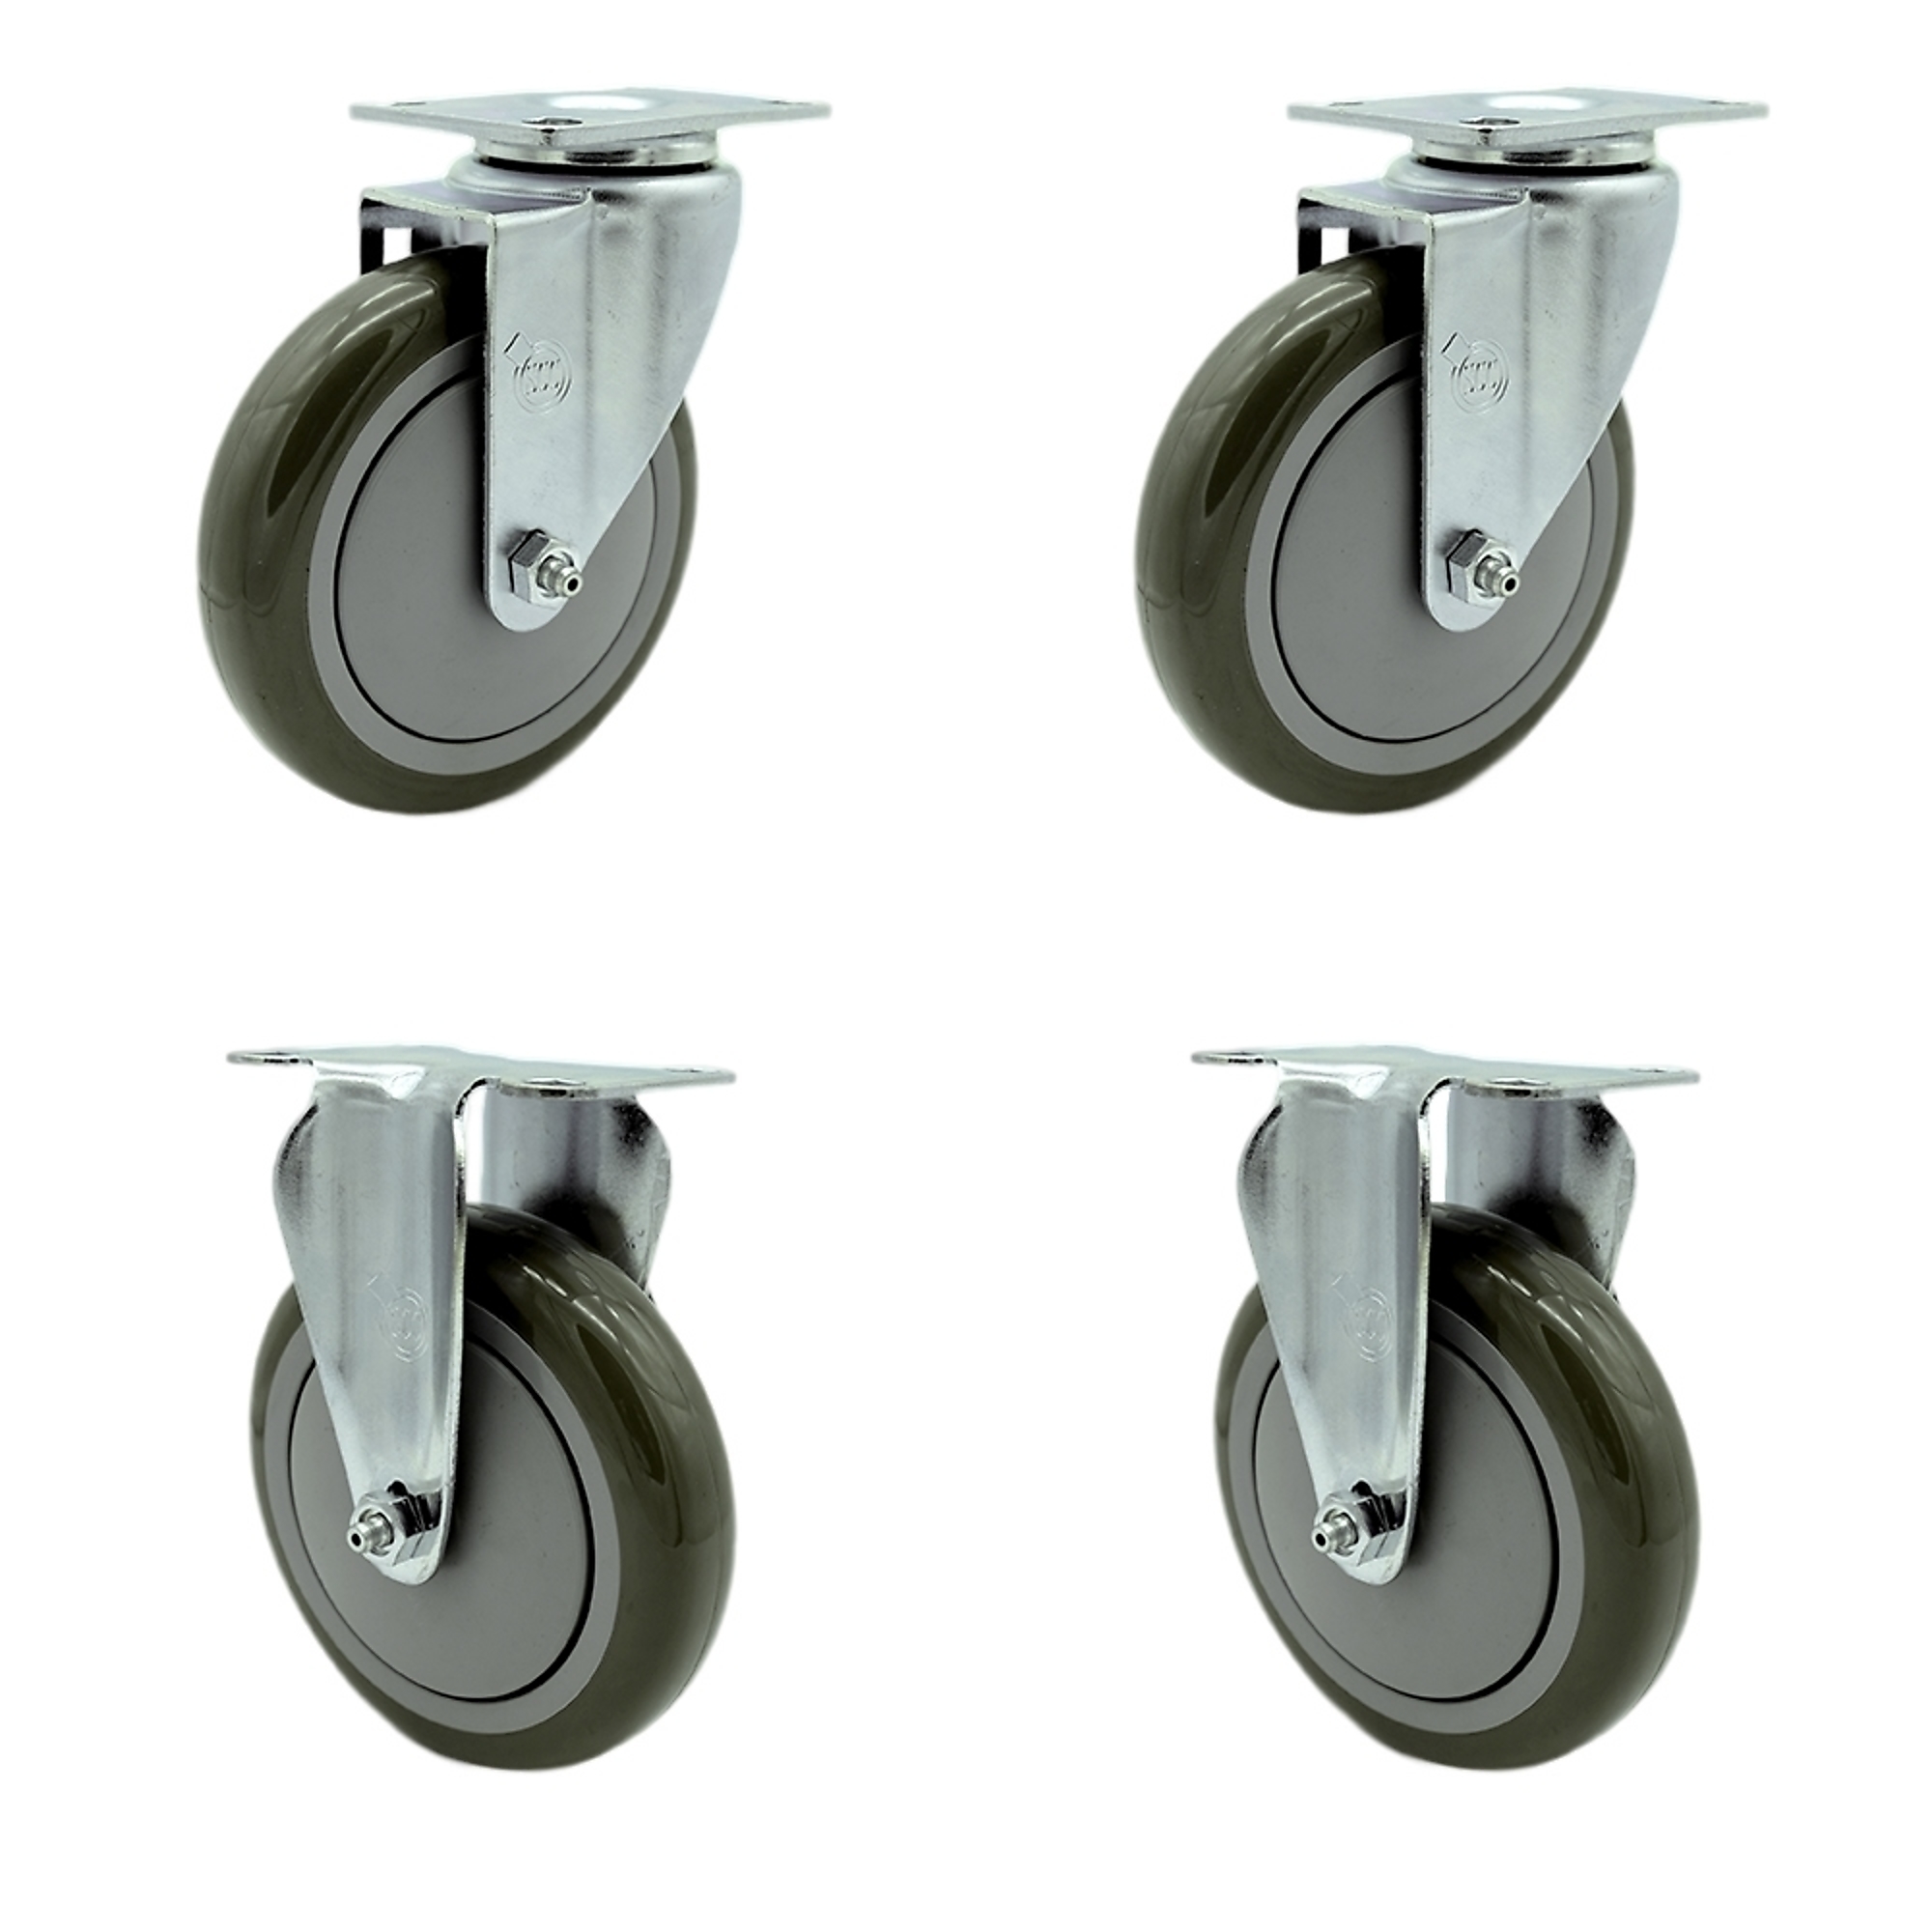 Service Caster, 5Inch x 1 1/4Inch Plate Casters, Wheel Diameter 5 in, Caster Type Swivel, Package (qty.) 4, Model SCC-20S514-PPUB-2-R514-2 -  670533852898